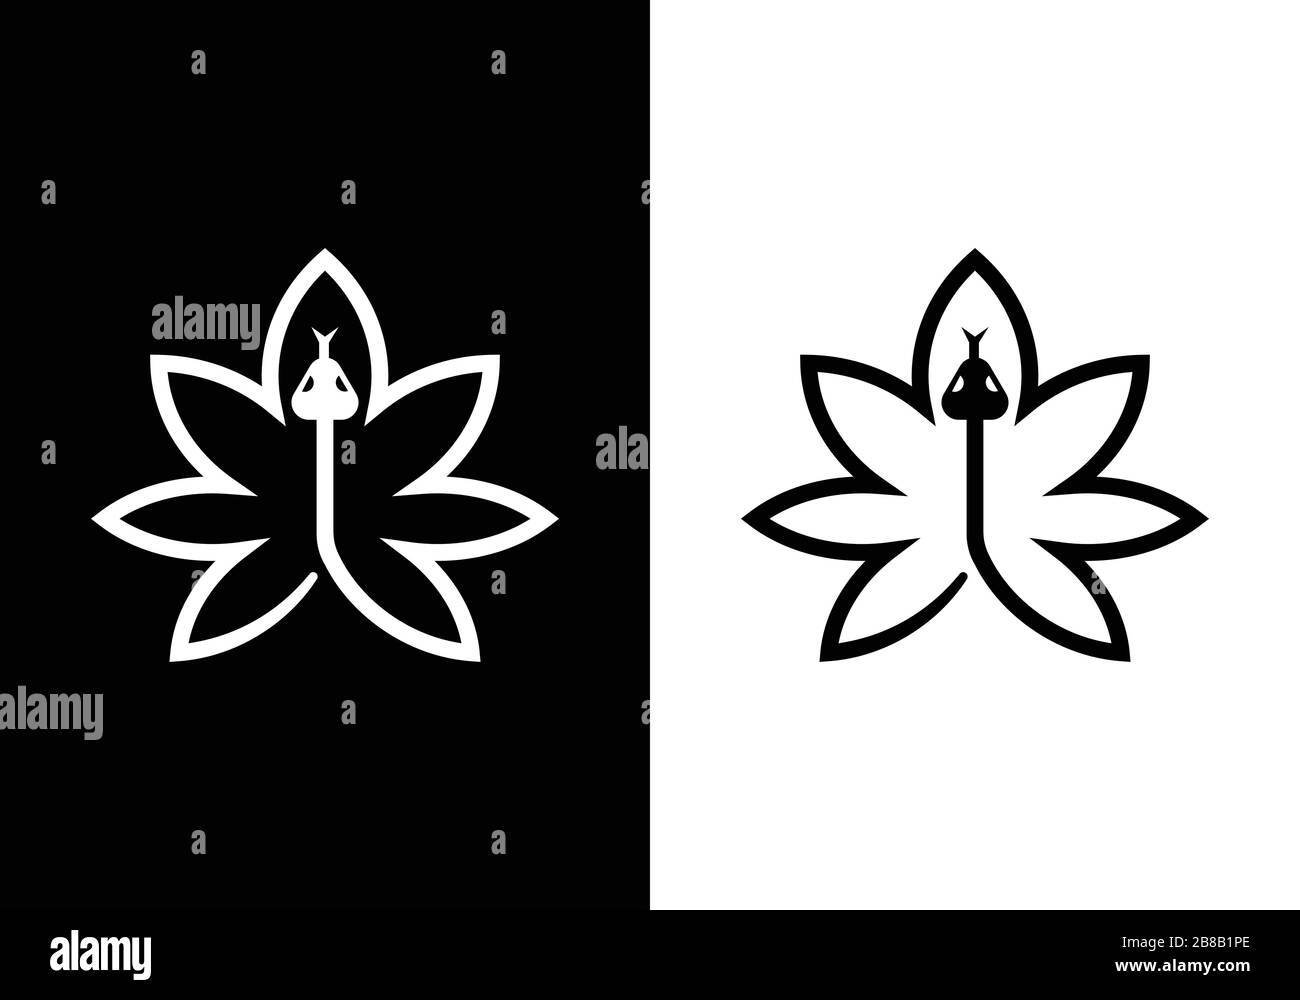 cannabis leaf logo vector icon on black and white background Stock Vector